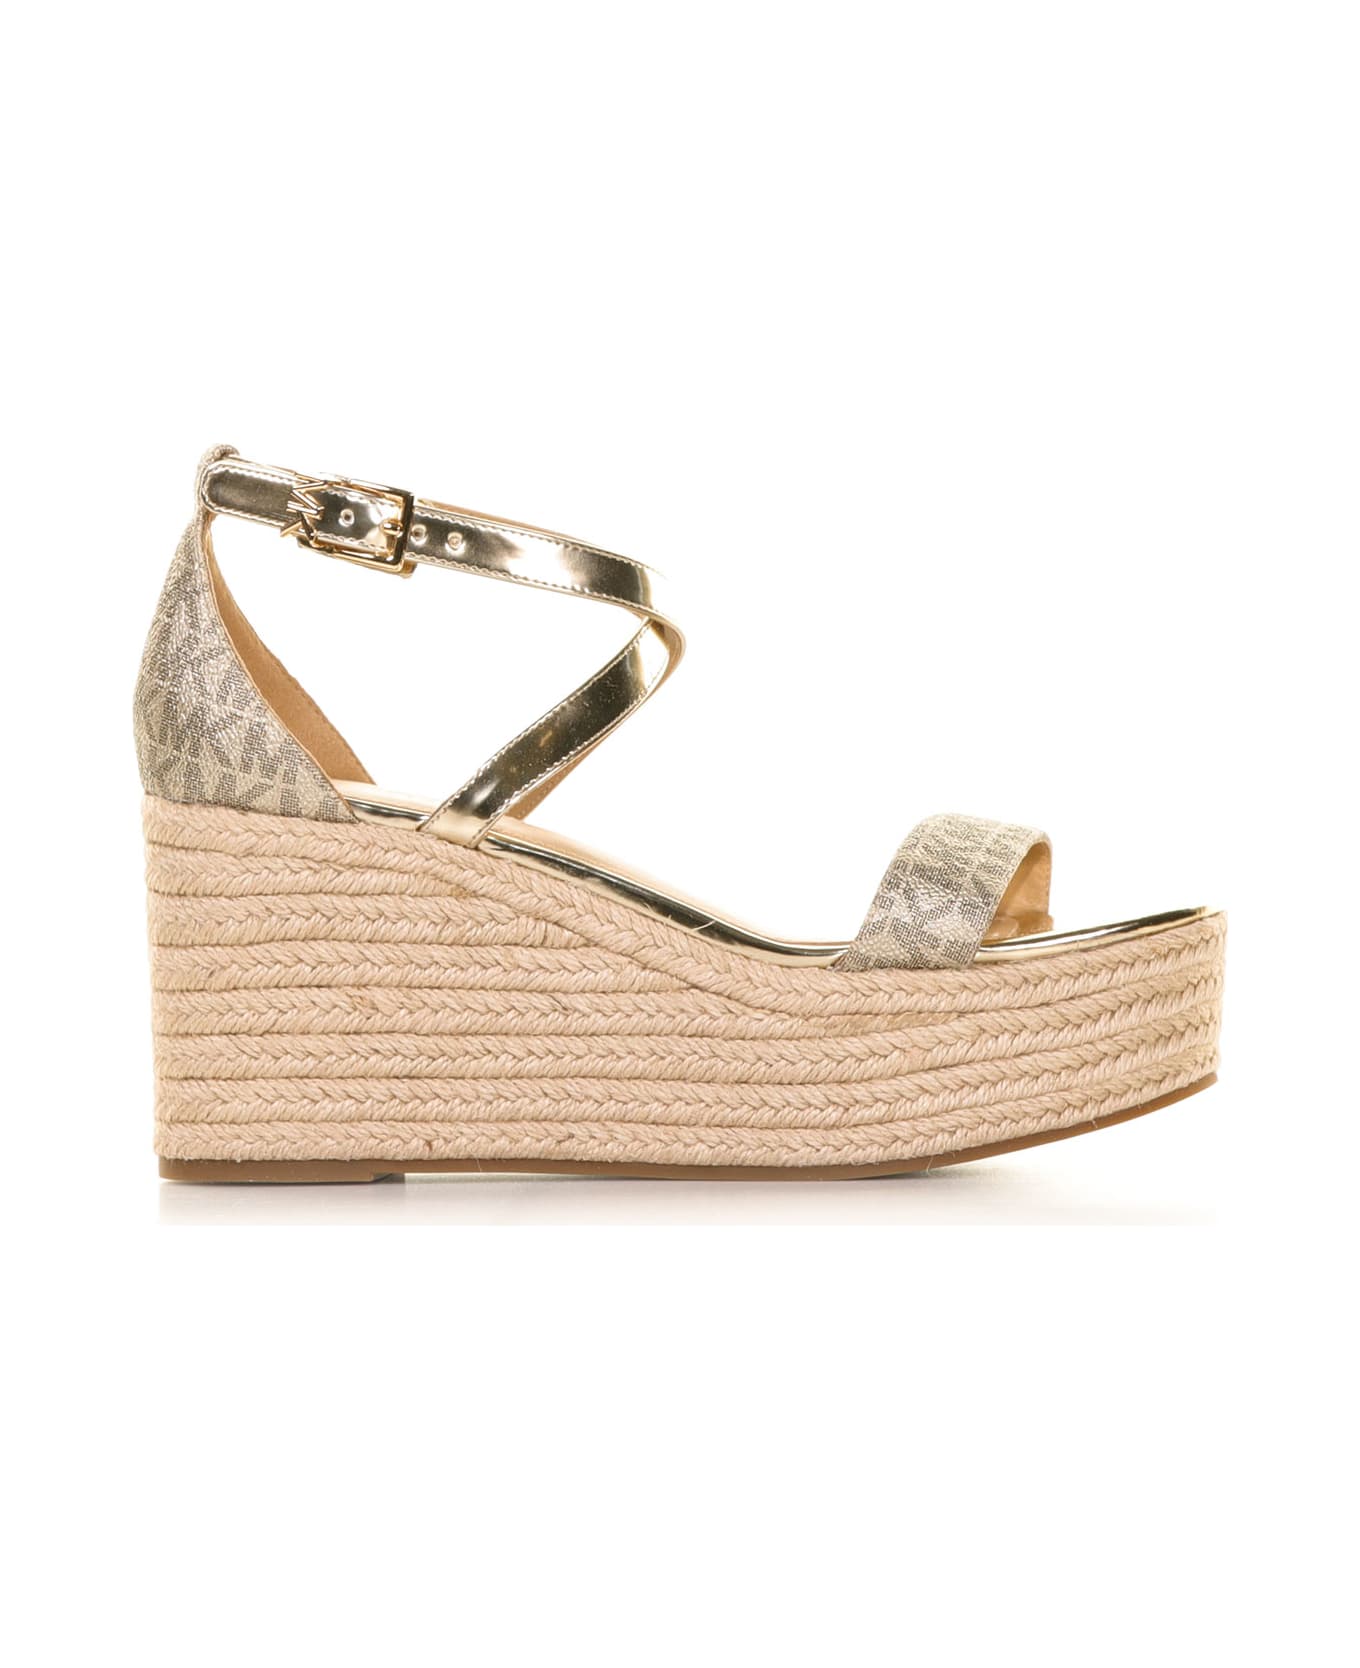 Michael Kors Collection Serena Gold Wedge Sandal - Pale/Gold